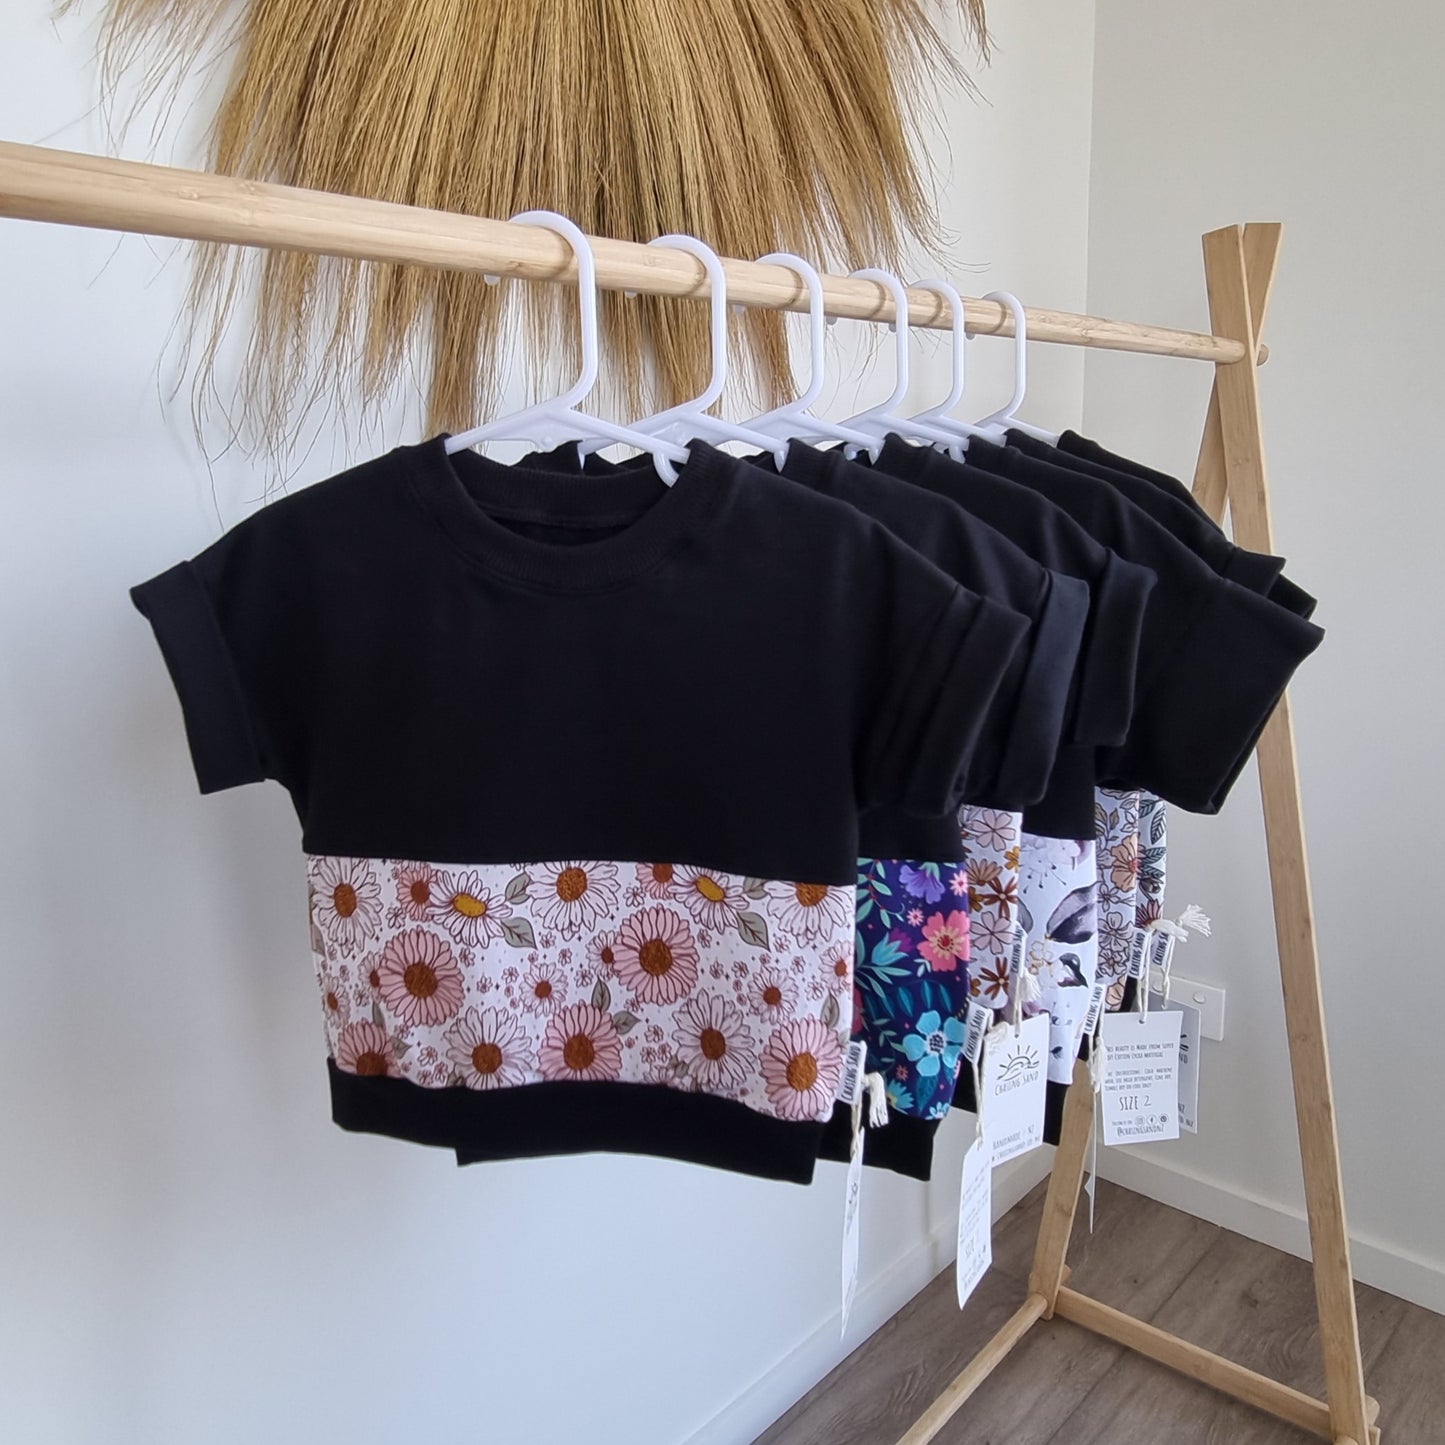 Tee - Rose Garden (Pink) hanging on wooden rack. Black t-shirt with pattern around the middle: .Pink watercolour rose design with green leaves on white background.